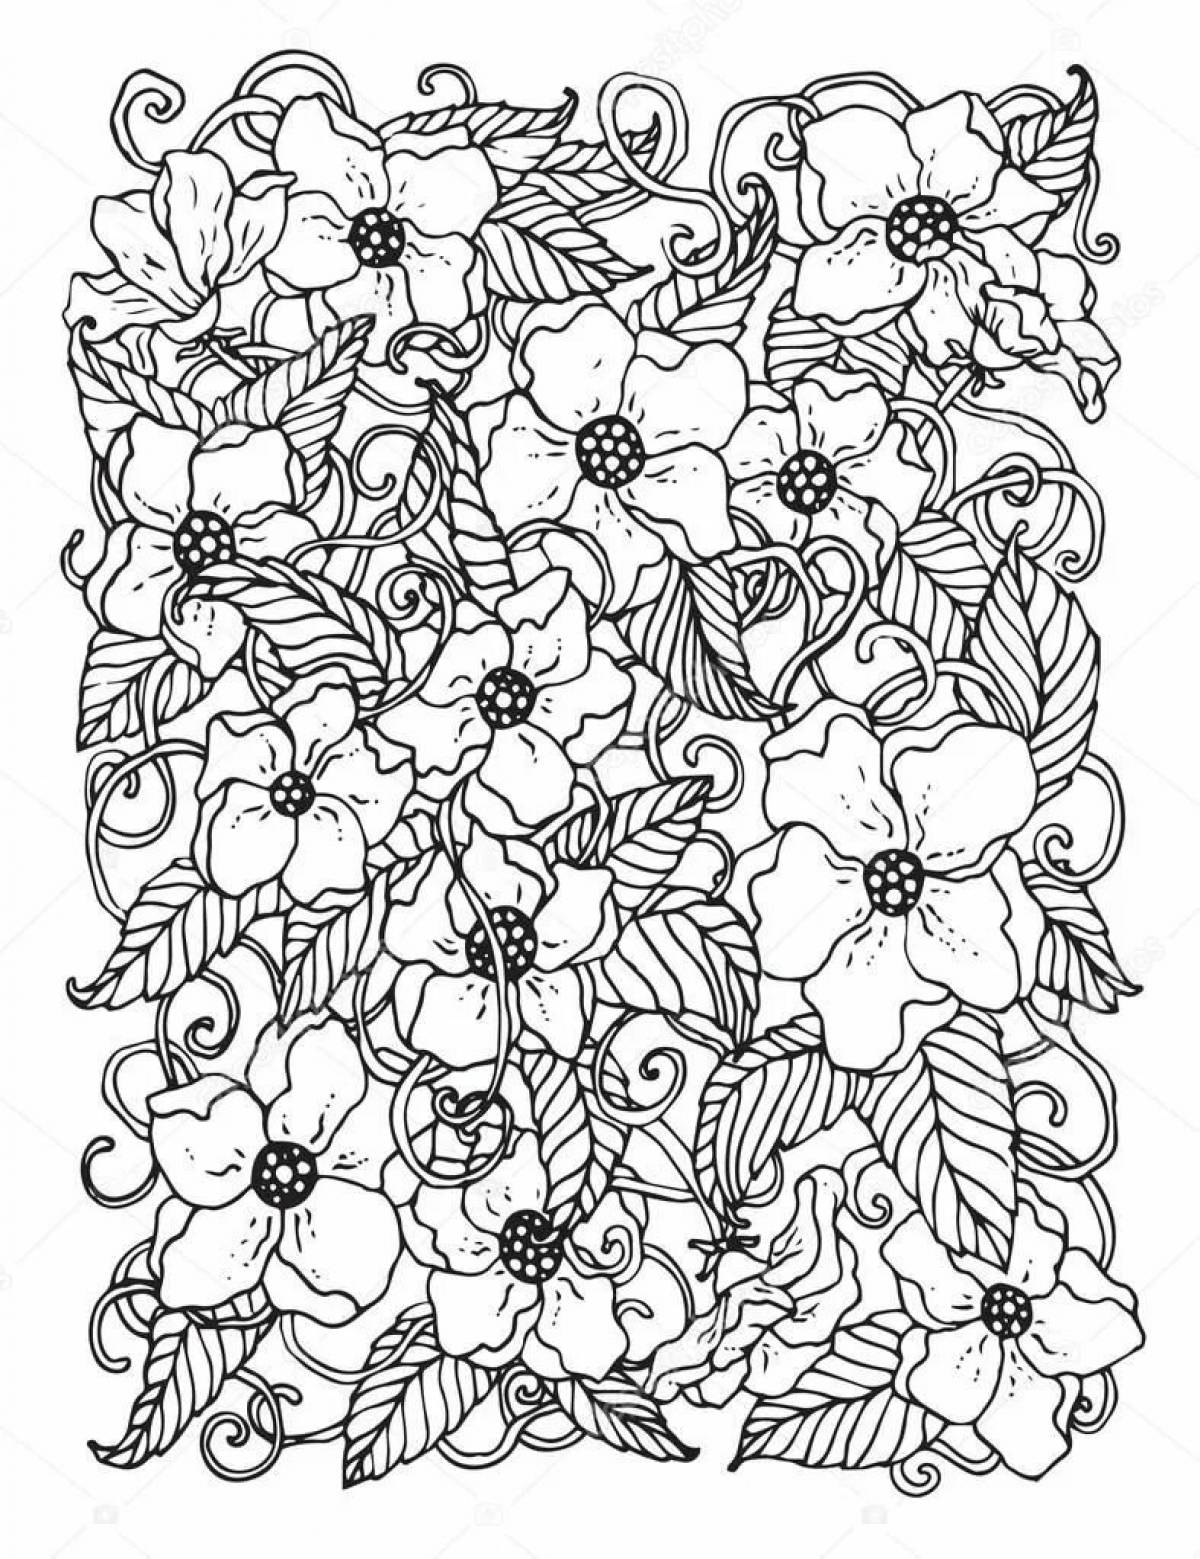 Amazing coloring book